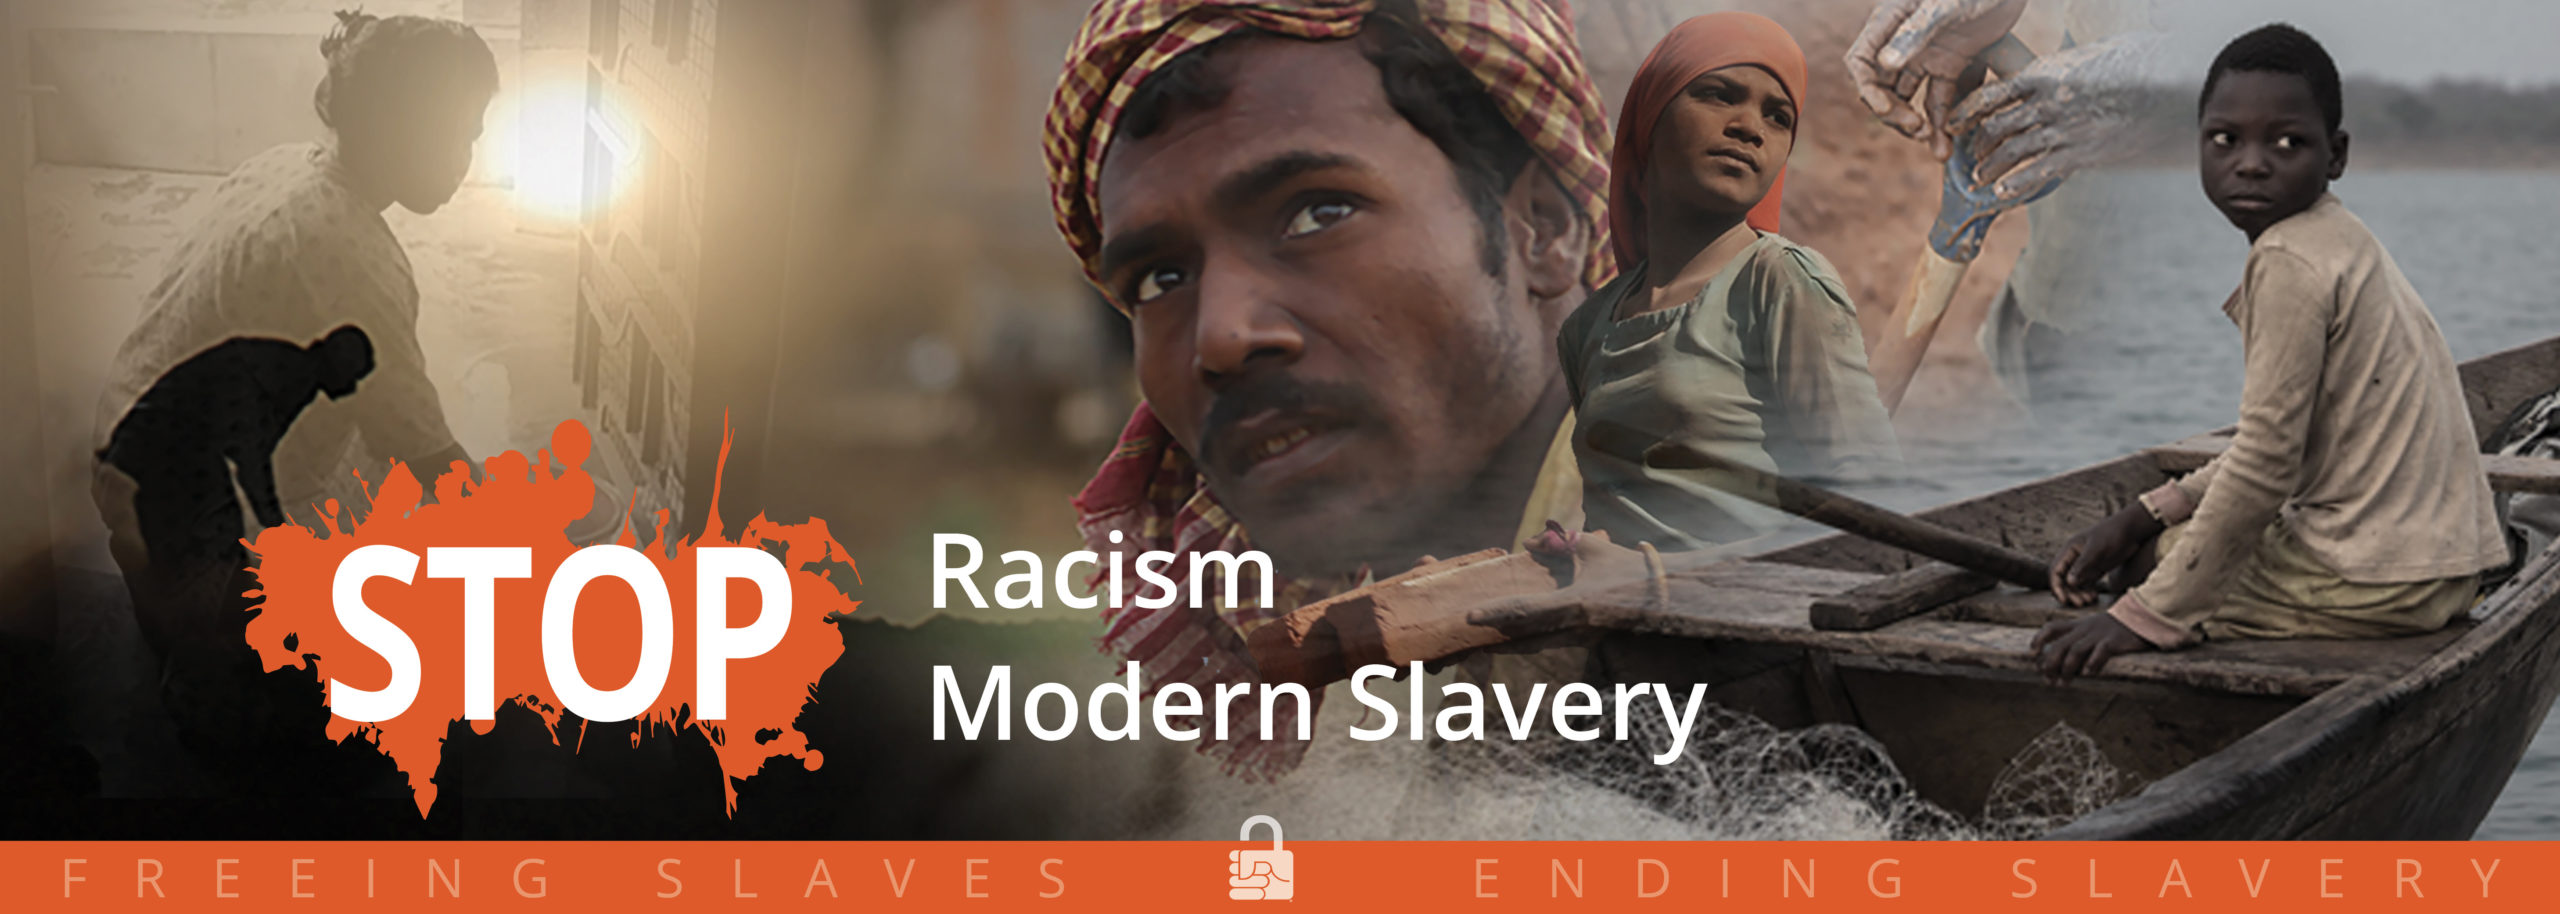 Help Free Indians Trapped in the Caste System